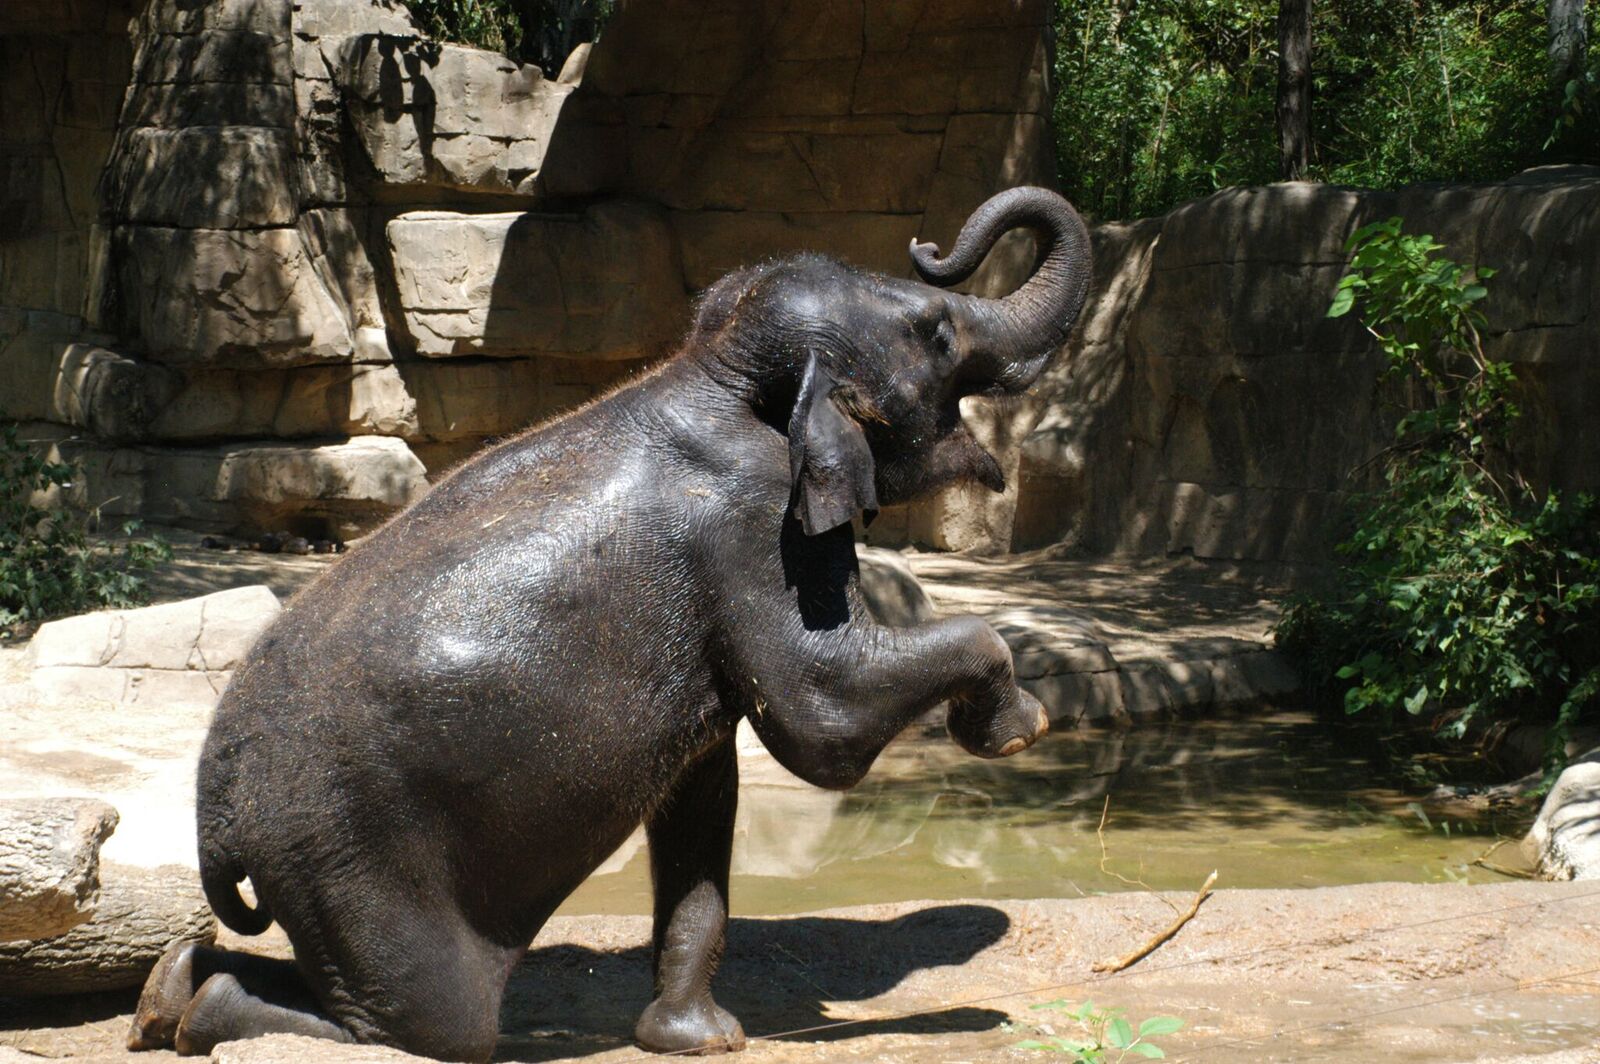 St Louis Zoo World Elephant Day Celebration Aims To Bring